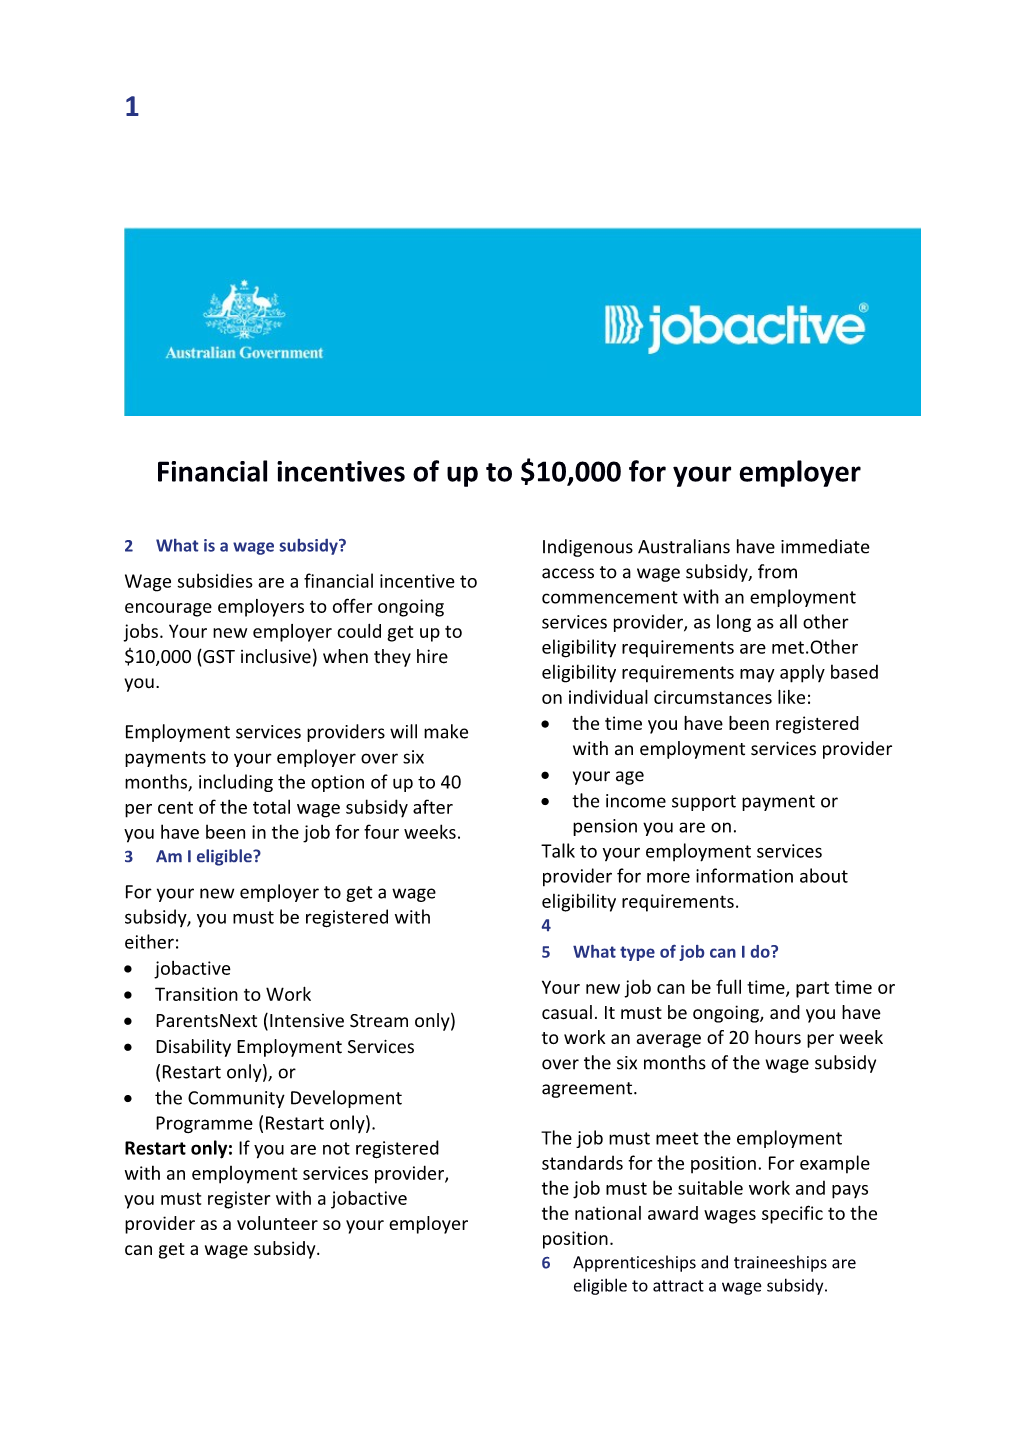 Financial Incentives of up to $10,000 for Your Employer